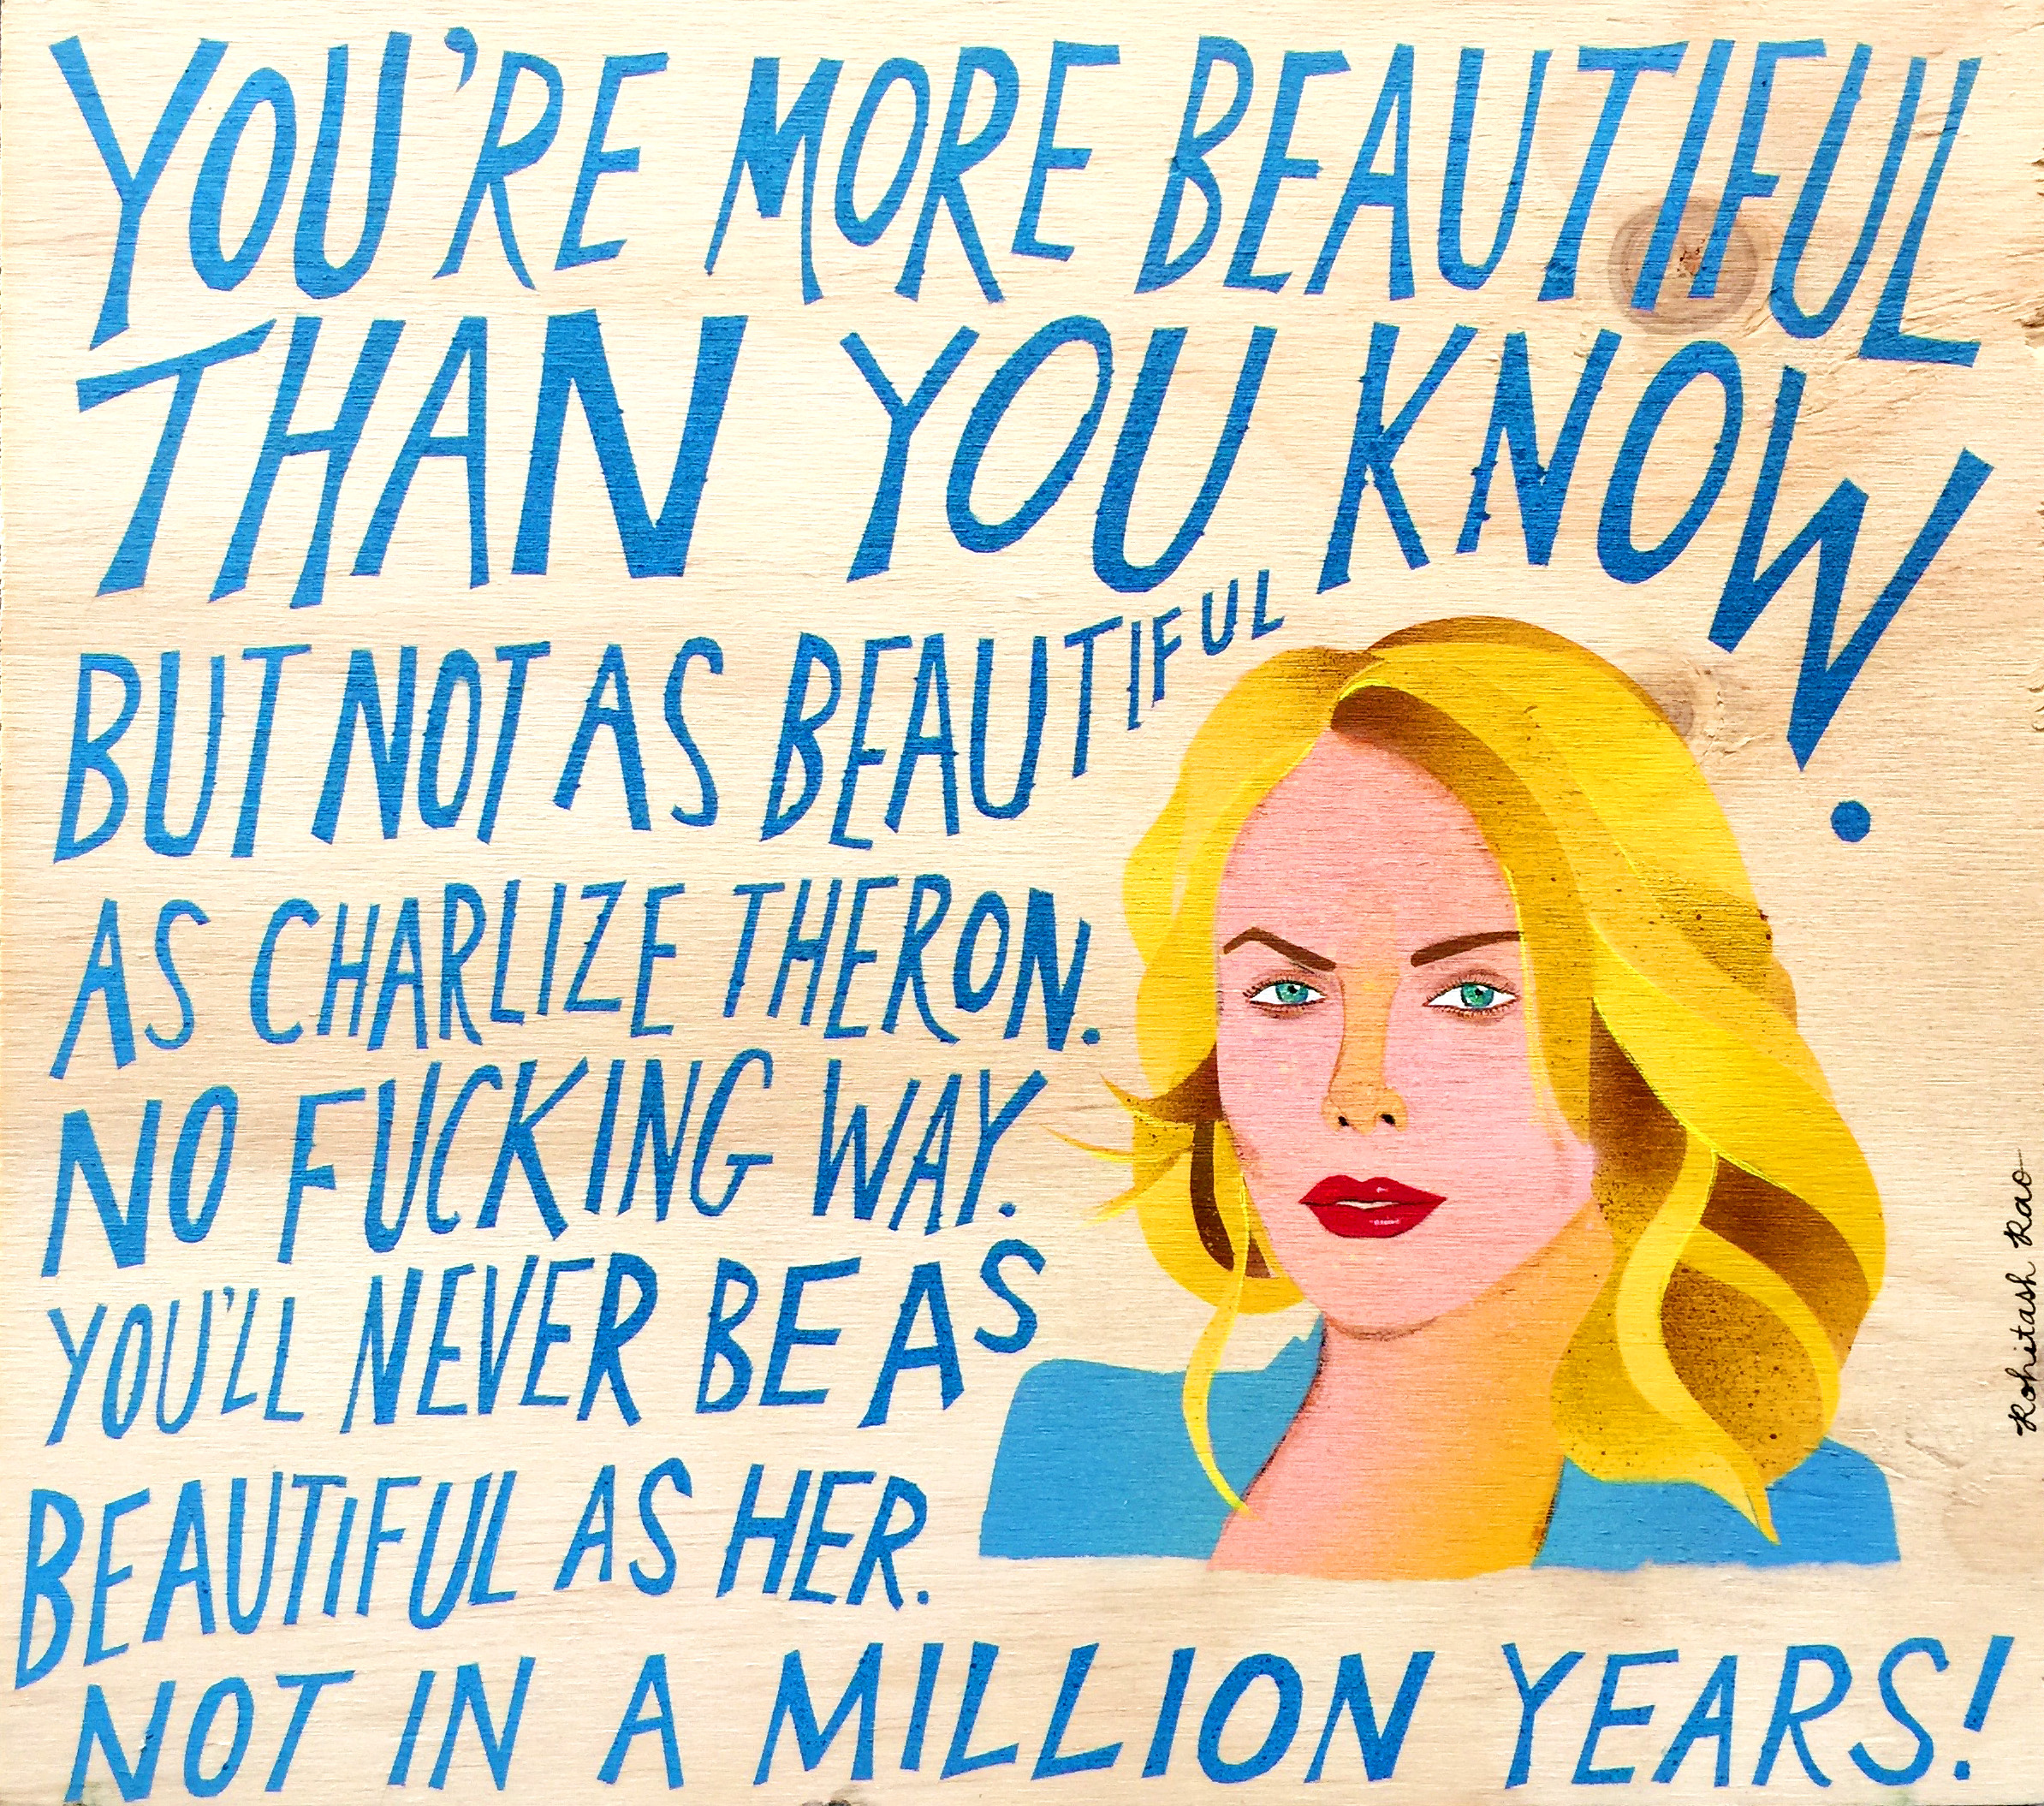 YOU'RE MORE BEAUTIFUL THAN YOU KNOW